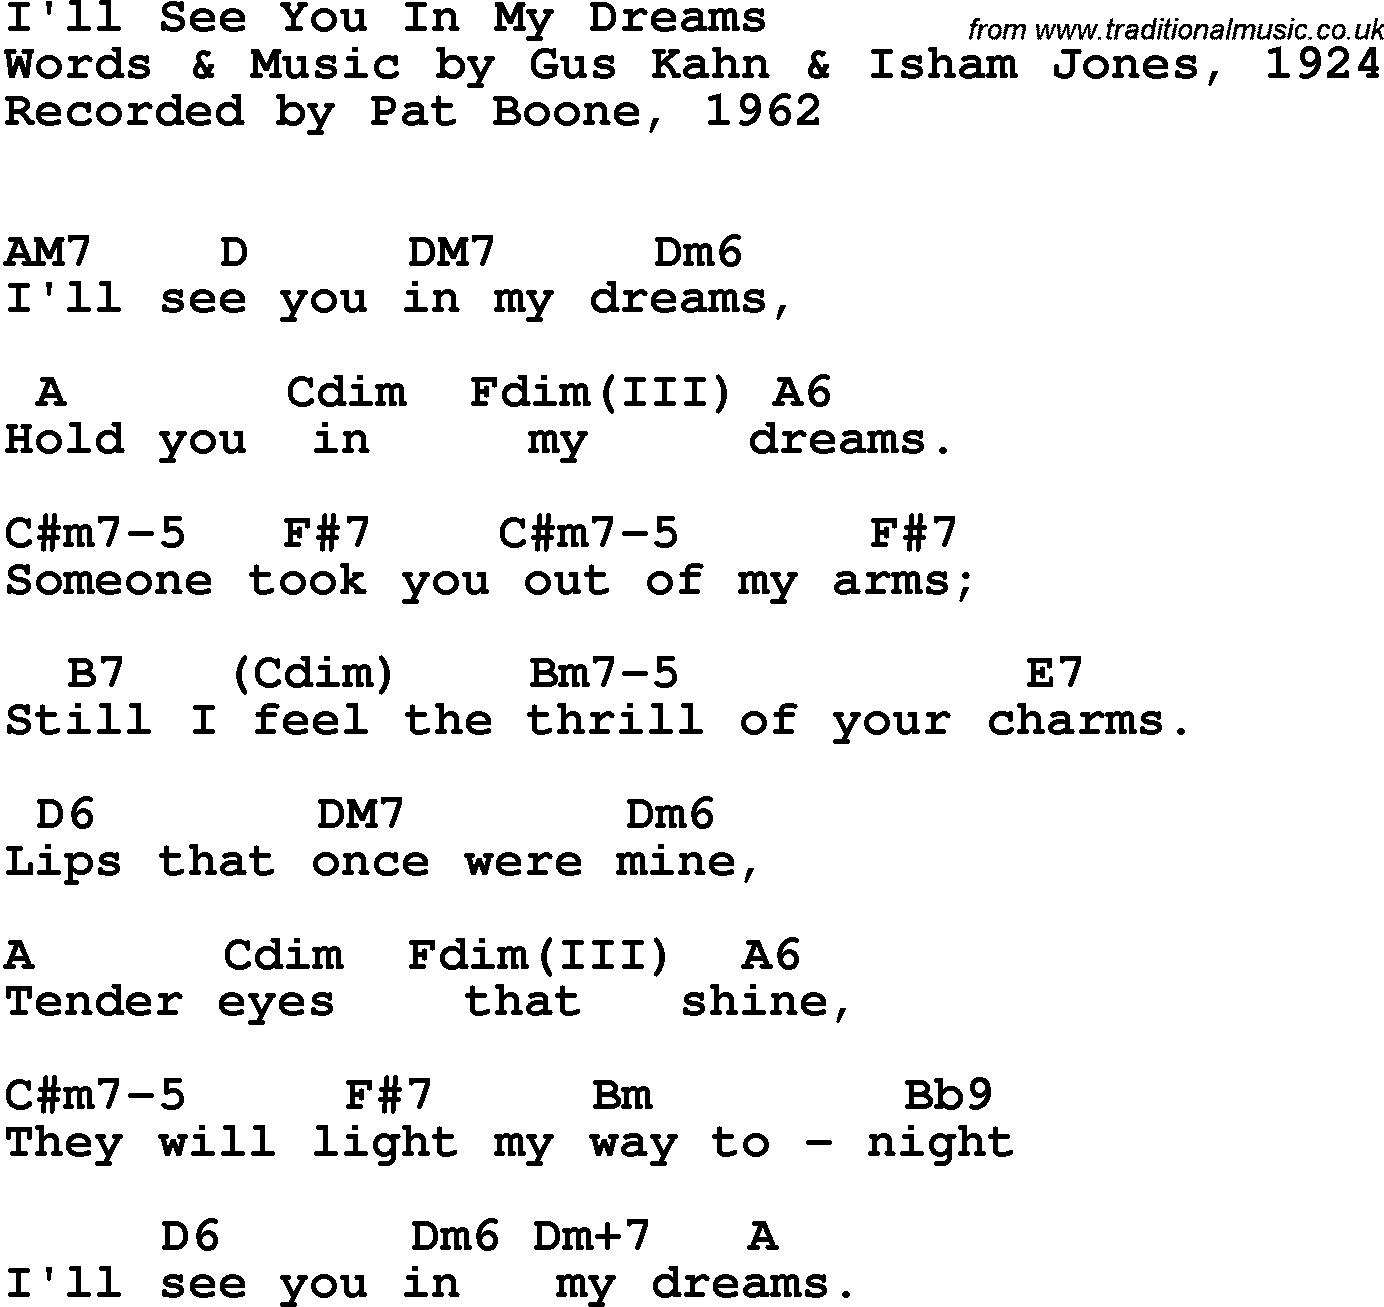 Song Lyrics with guitar chords for I'll See You In My Dreams - Pat Boone, 1962